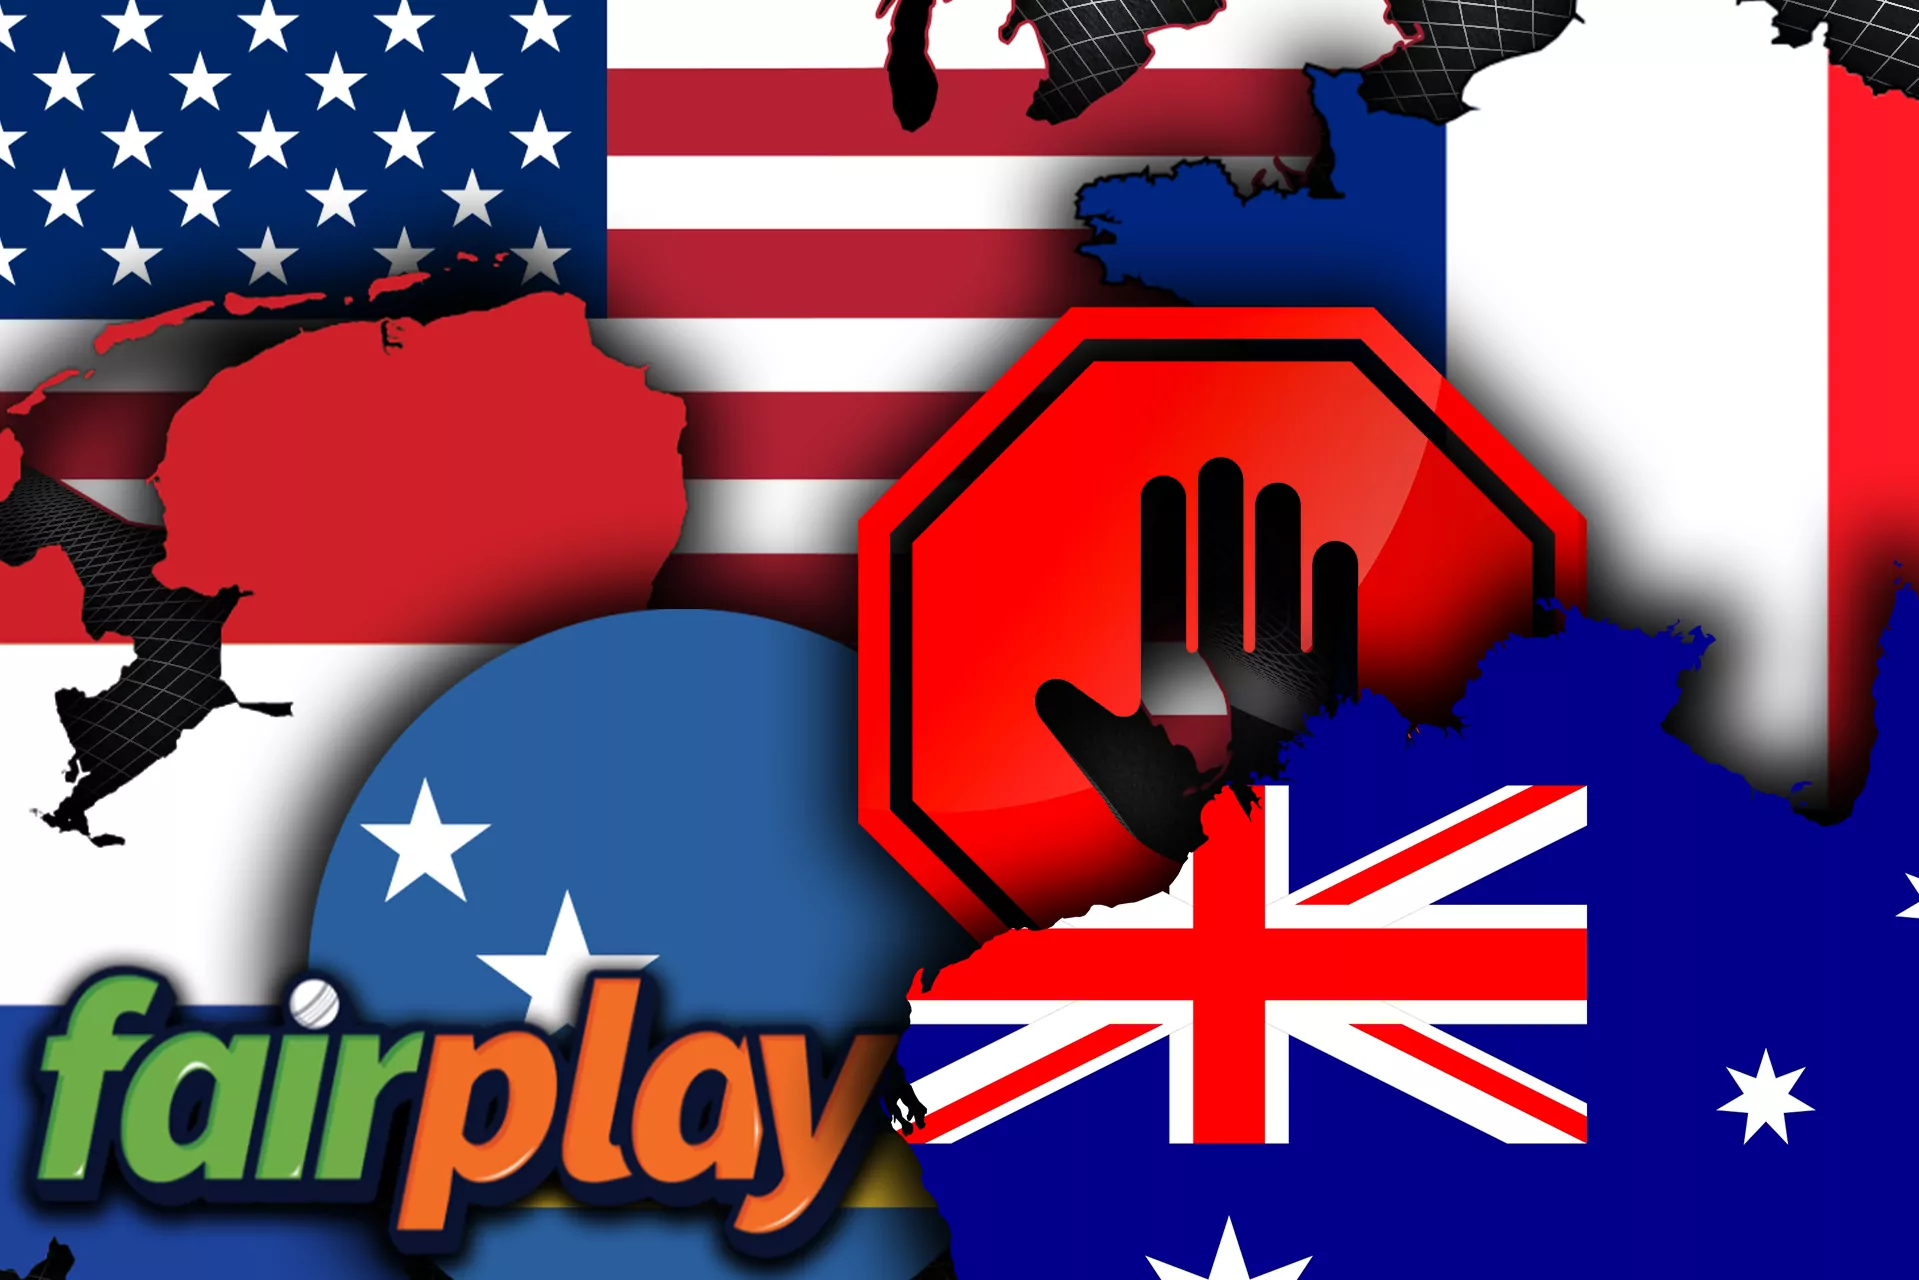 Fairplay is nor available in every country.